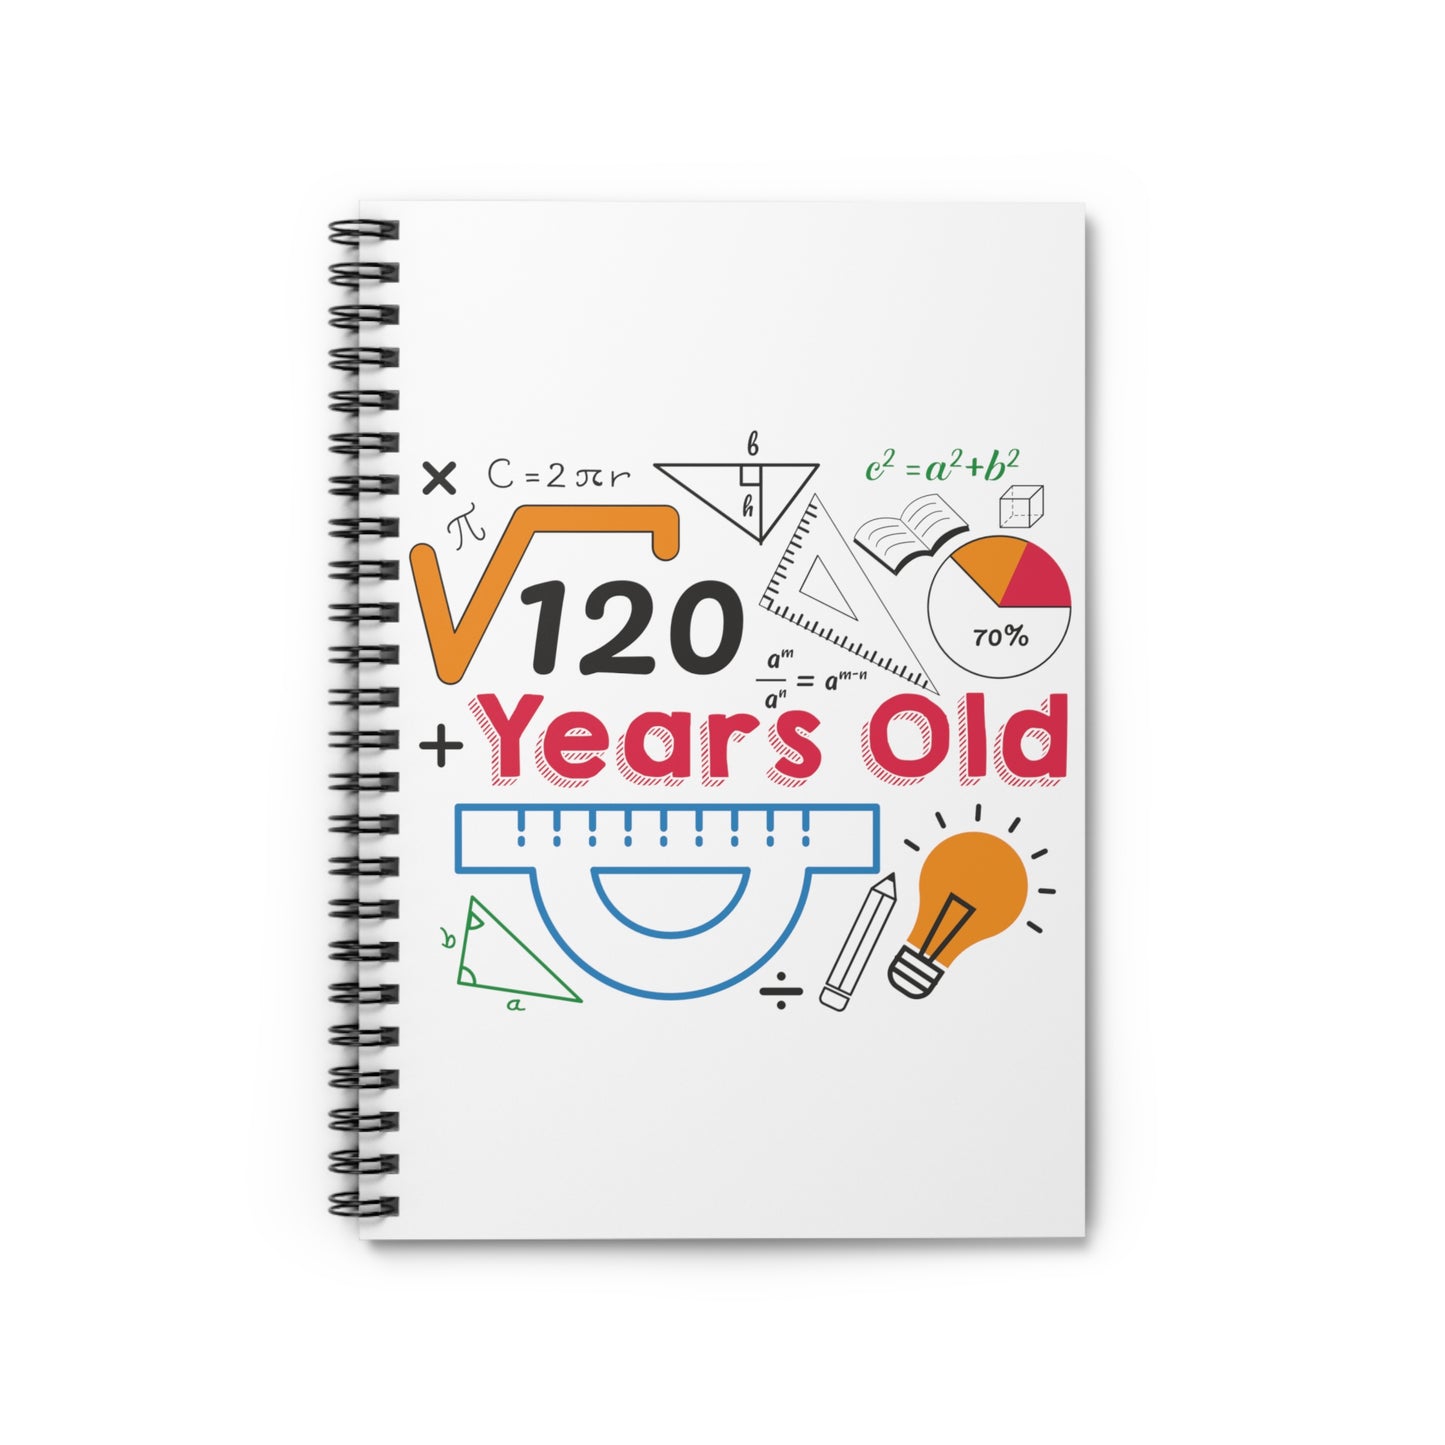 Birthday Formula: Spiral Notebook - Log Books - Journals - Diaries - and More Custom Printed by TheGlassyLass